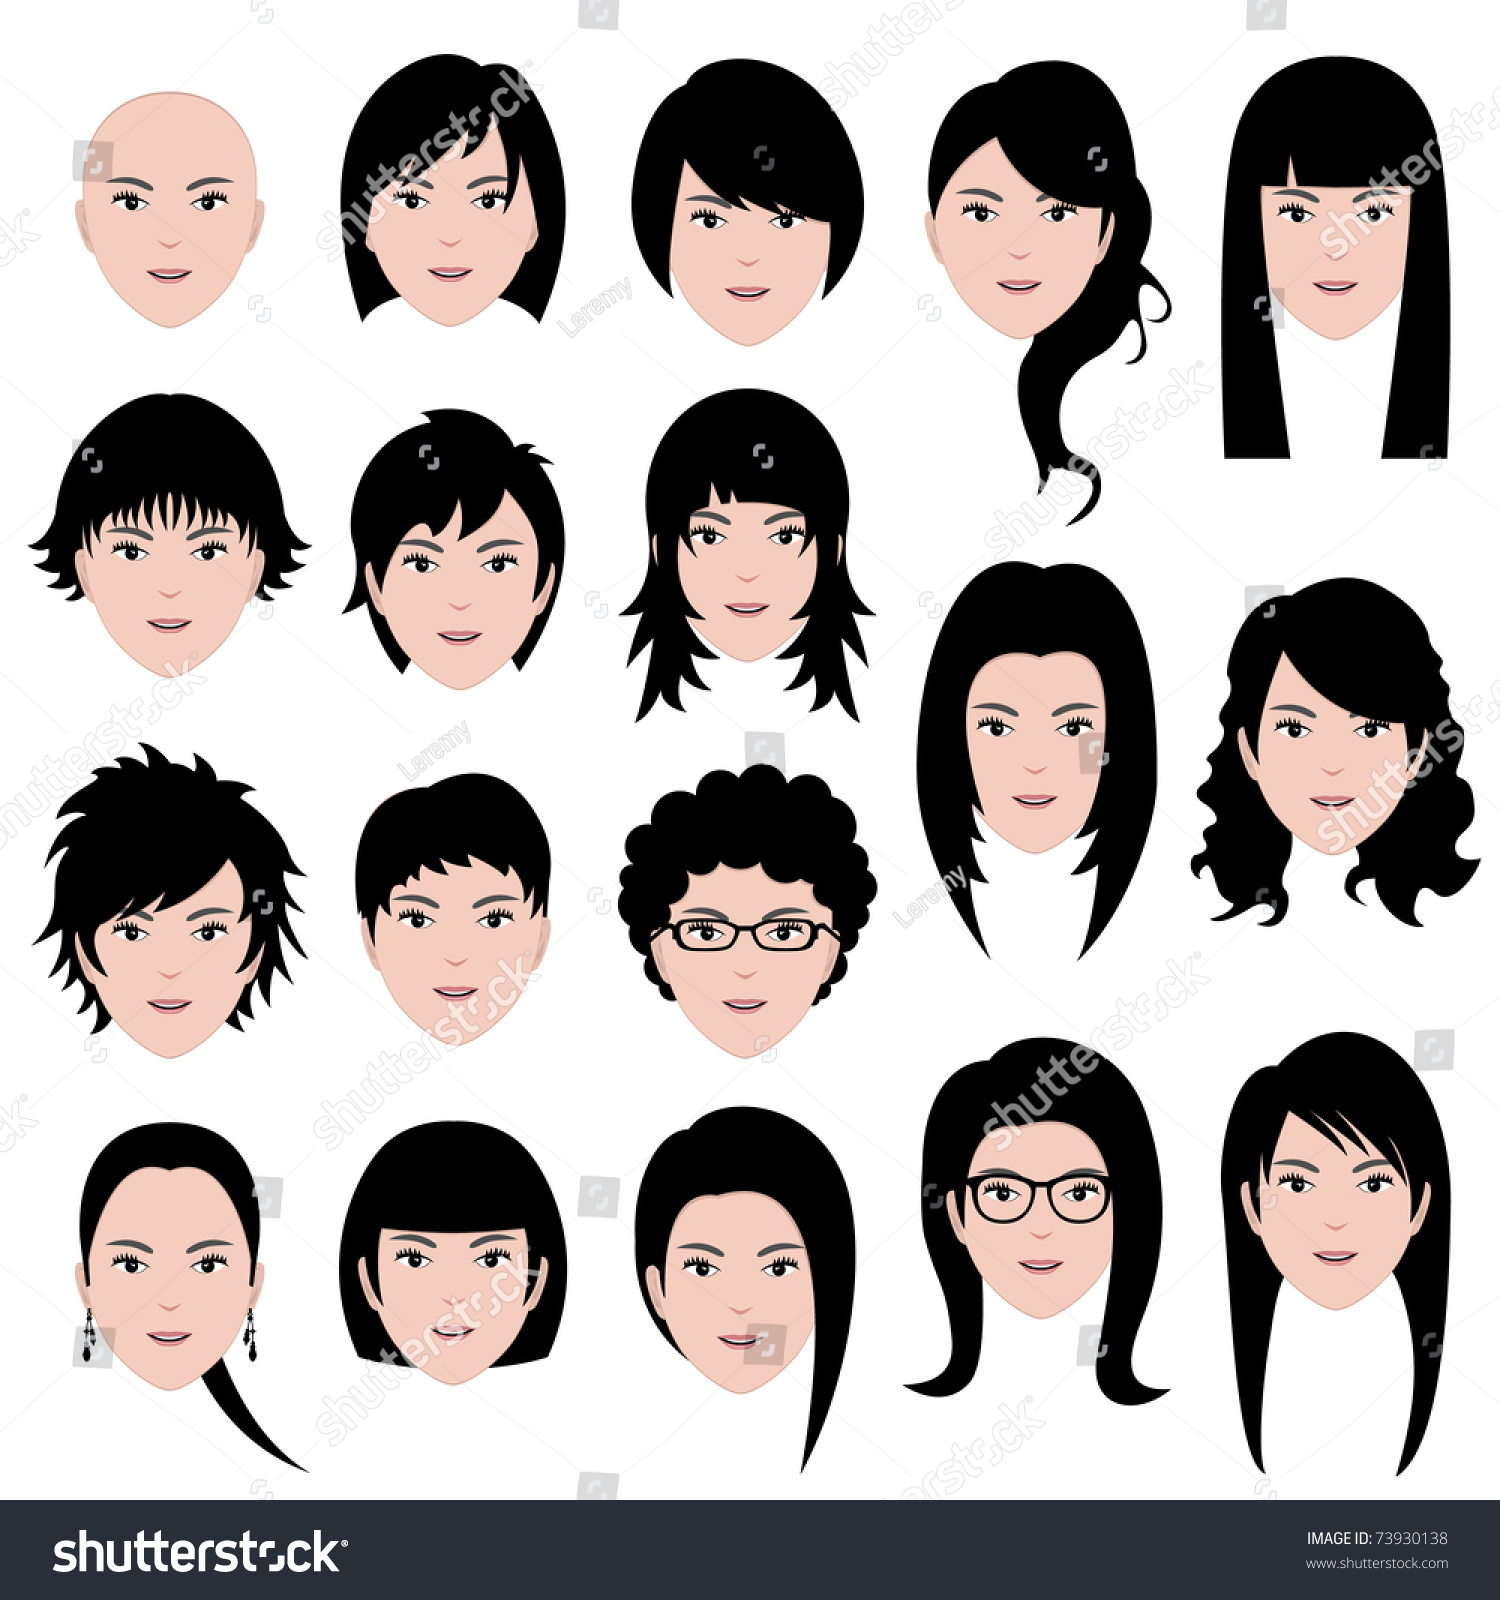 clipart of human heads - photo #50